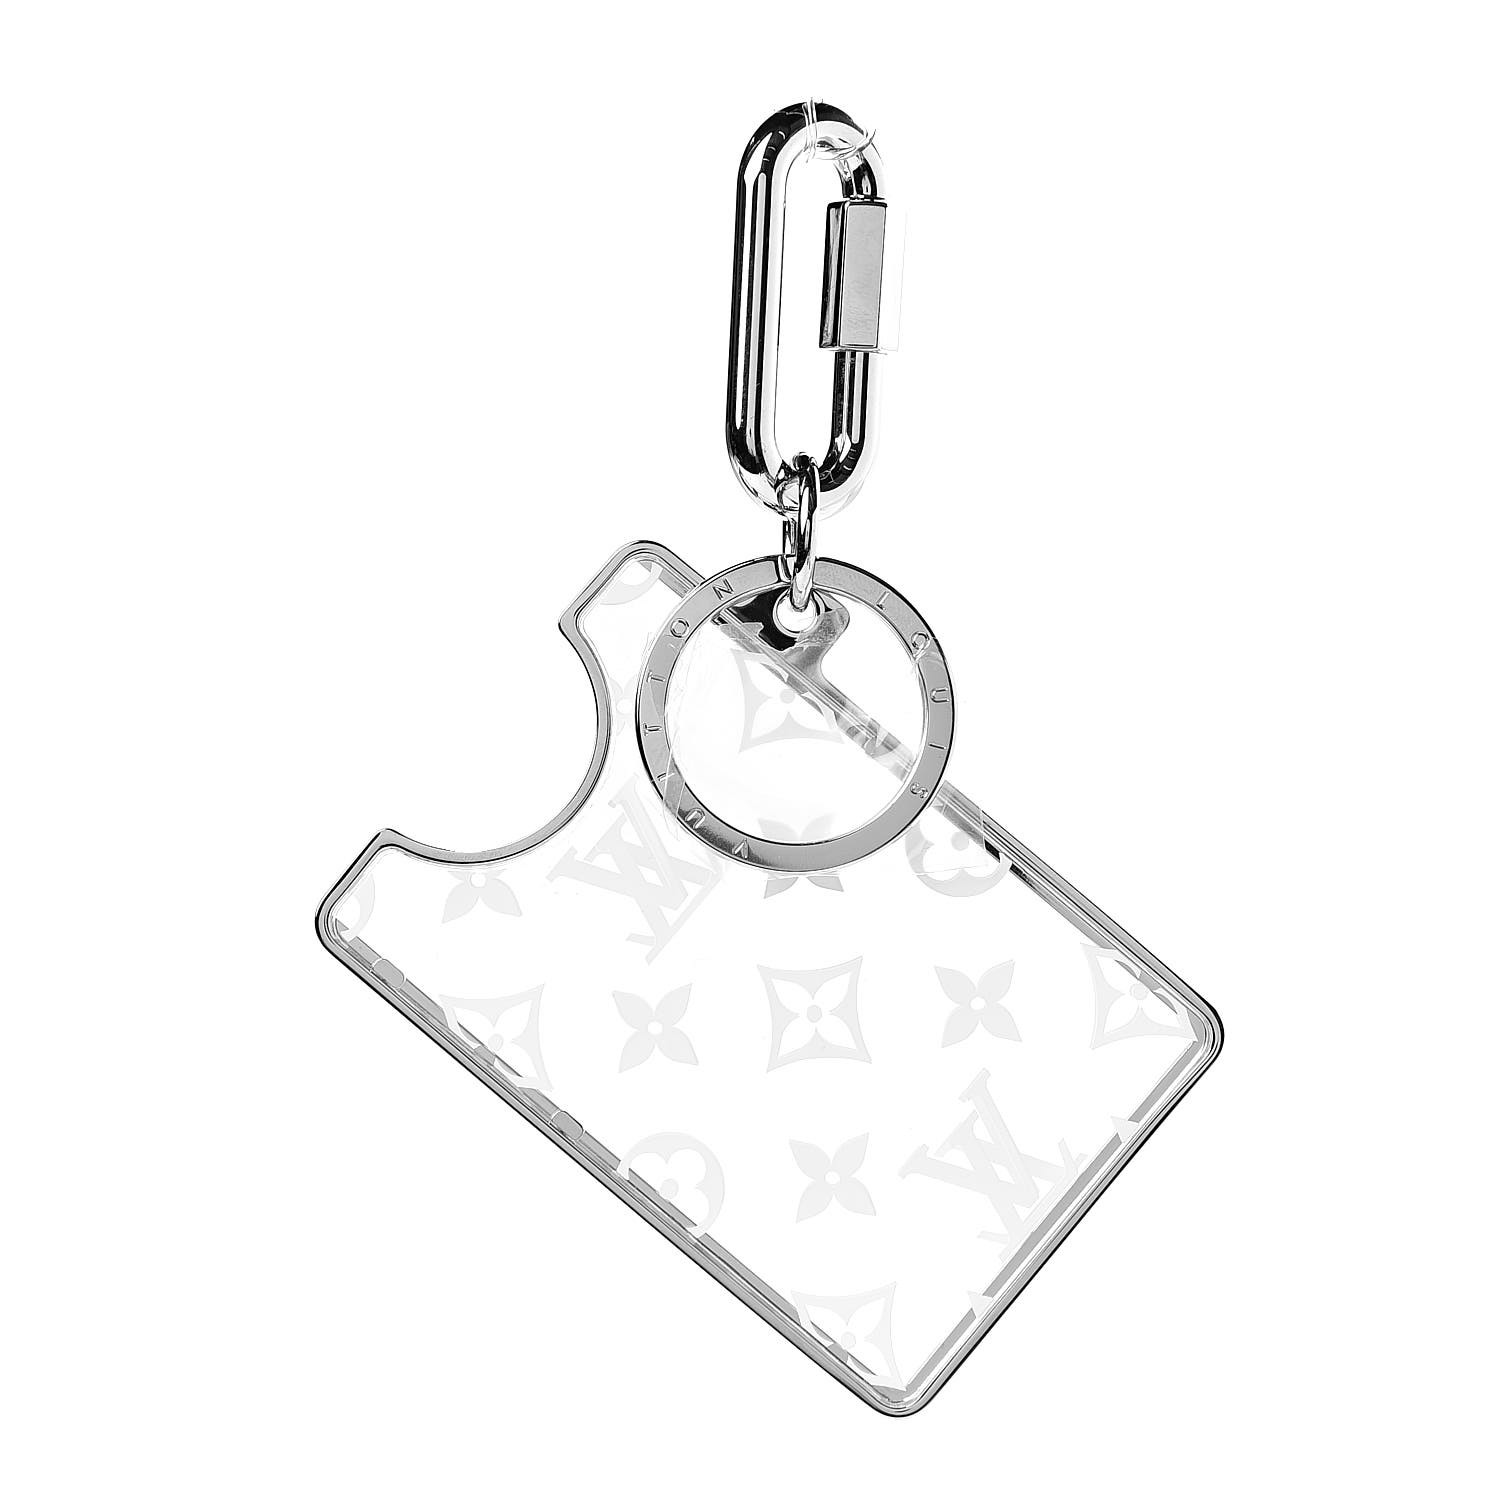 LOUIS VUITTON * LV Prism ID Holder Bag Charm and Key Holder